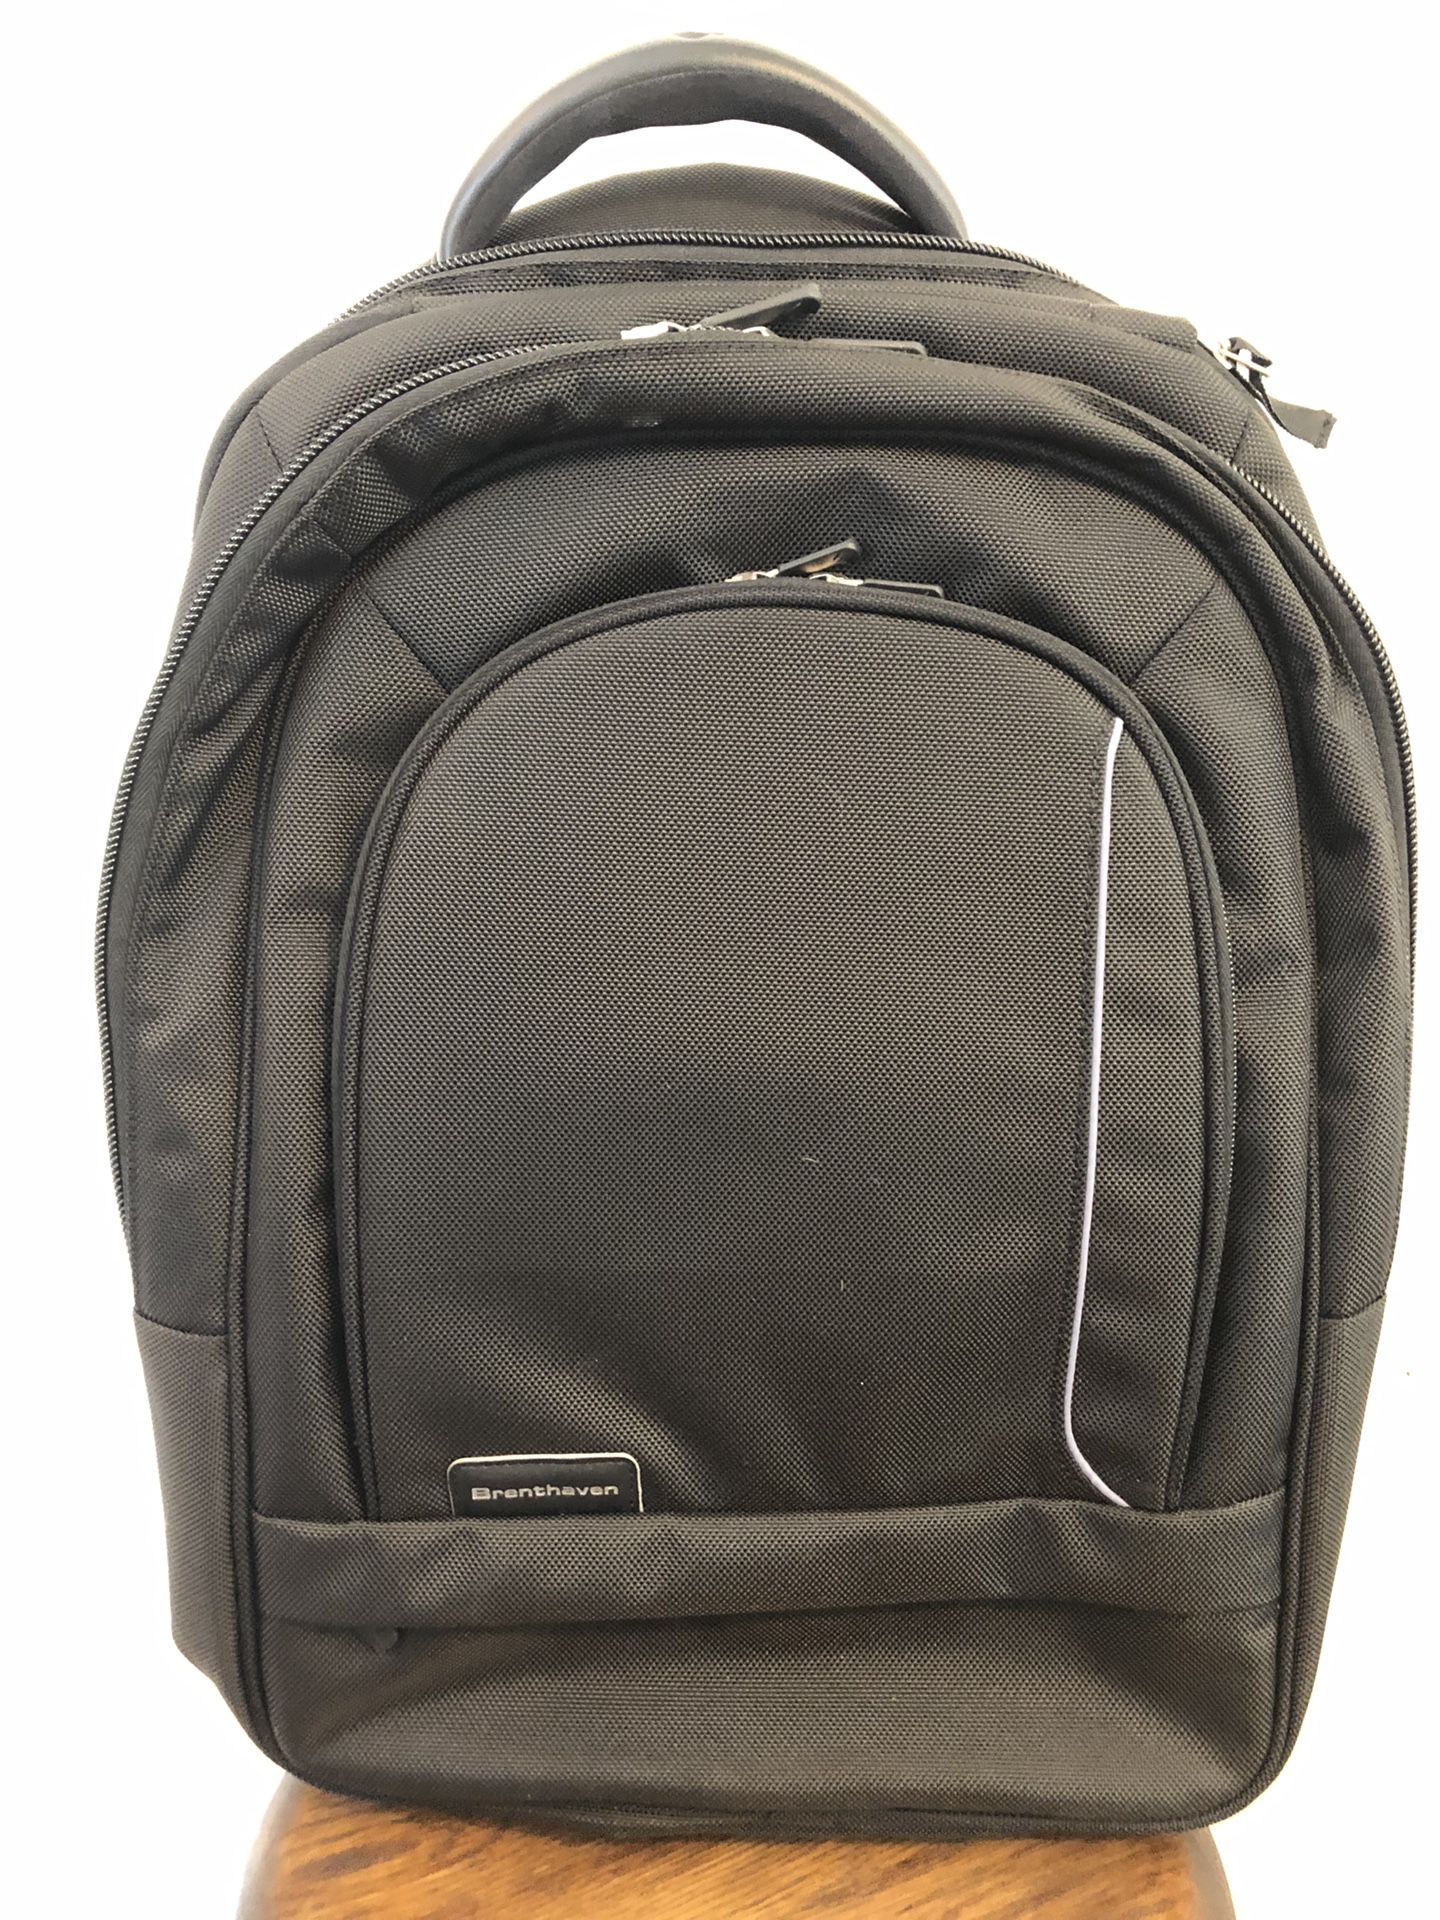 NEW Brenthaven ProStyle Laptop Backpack!